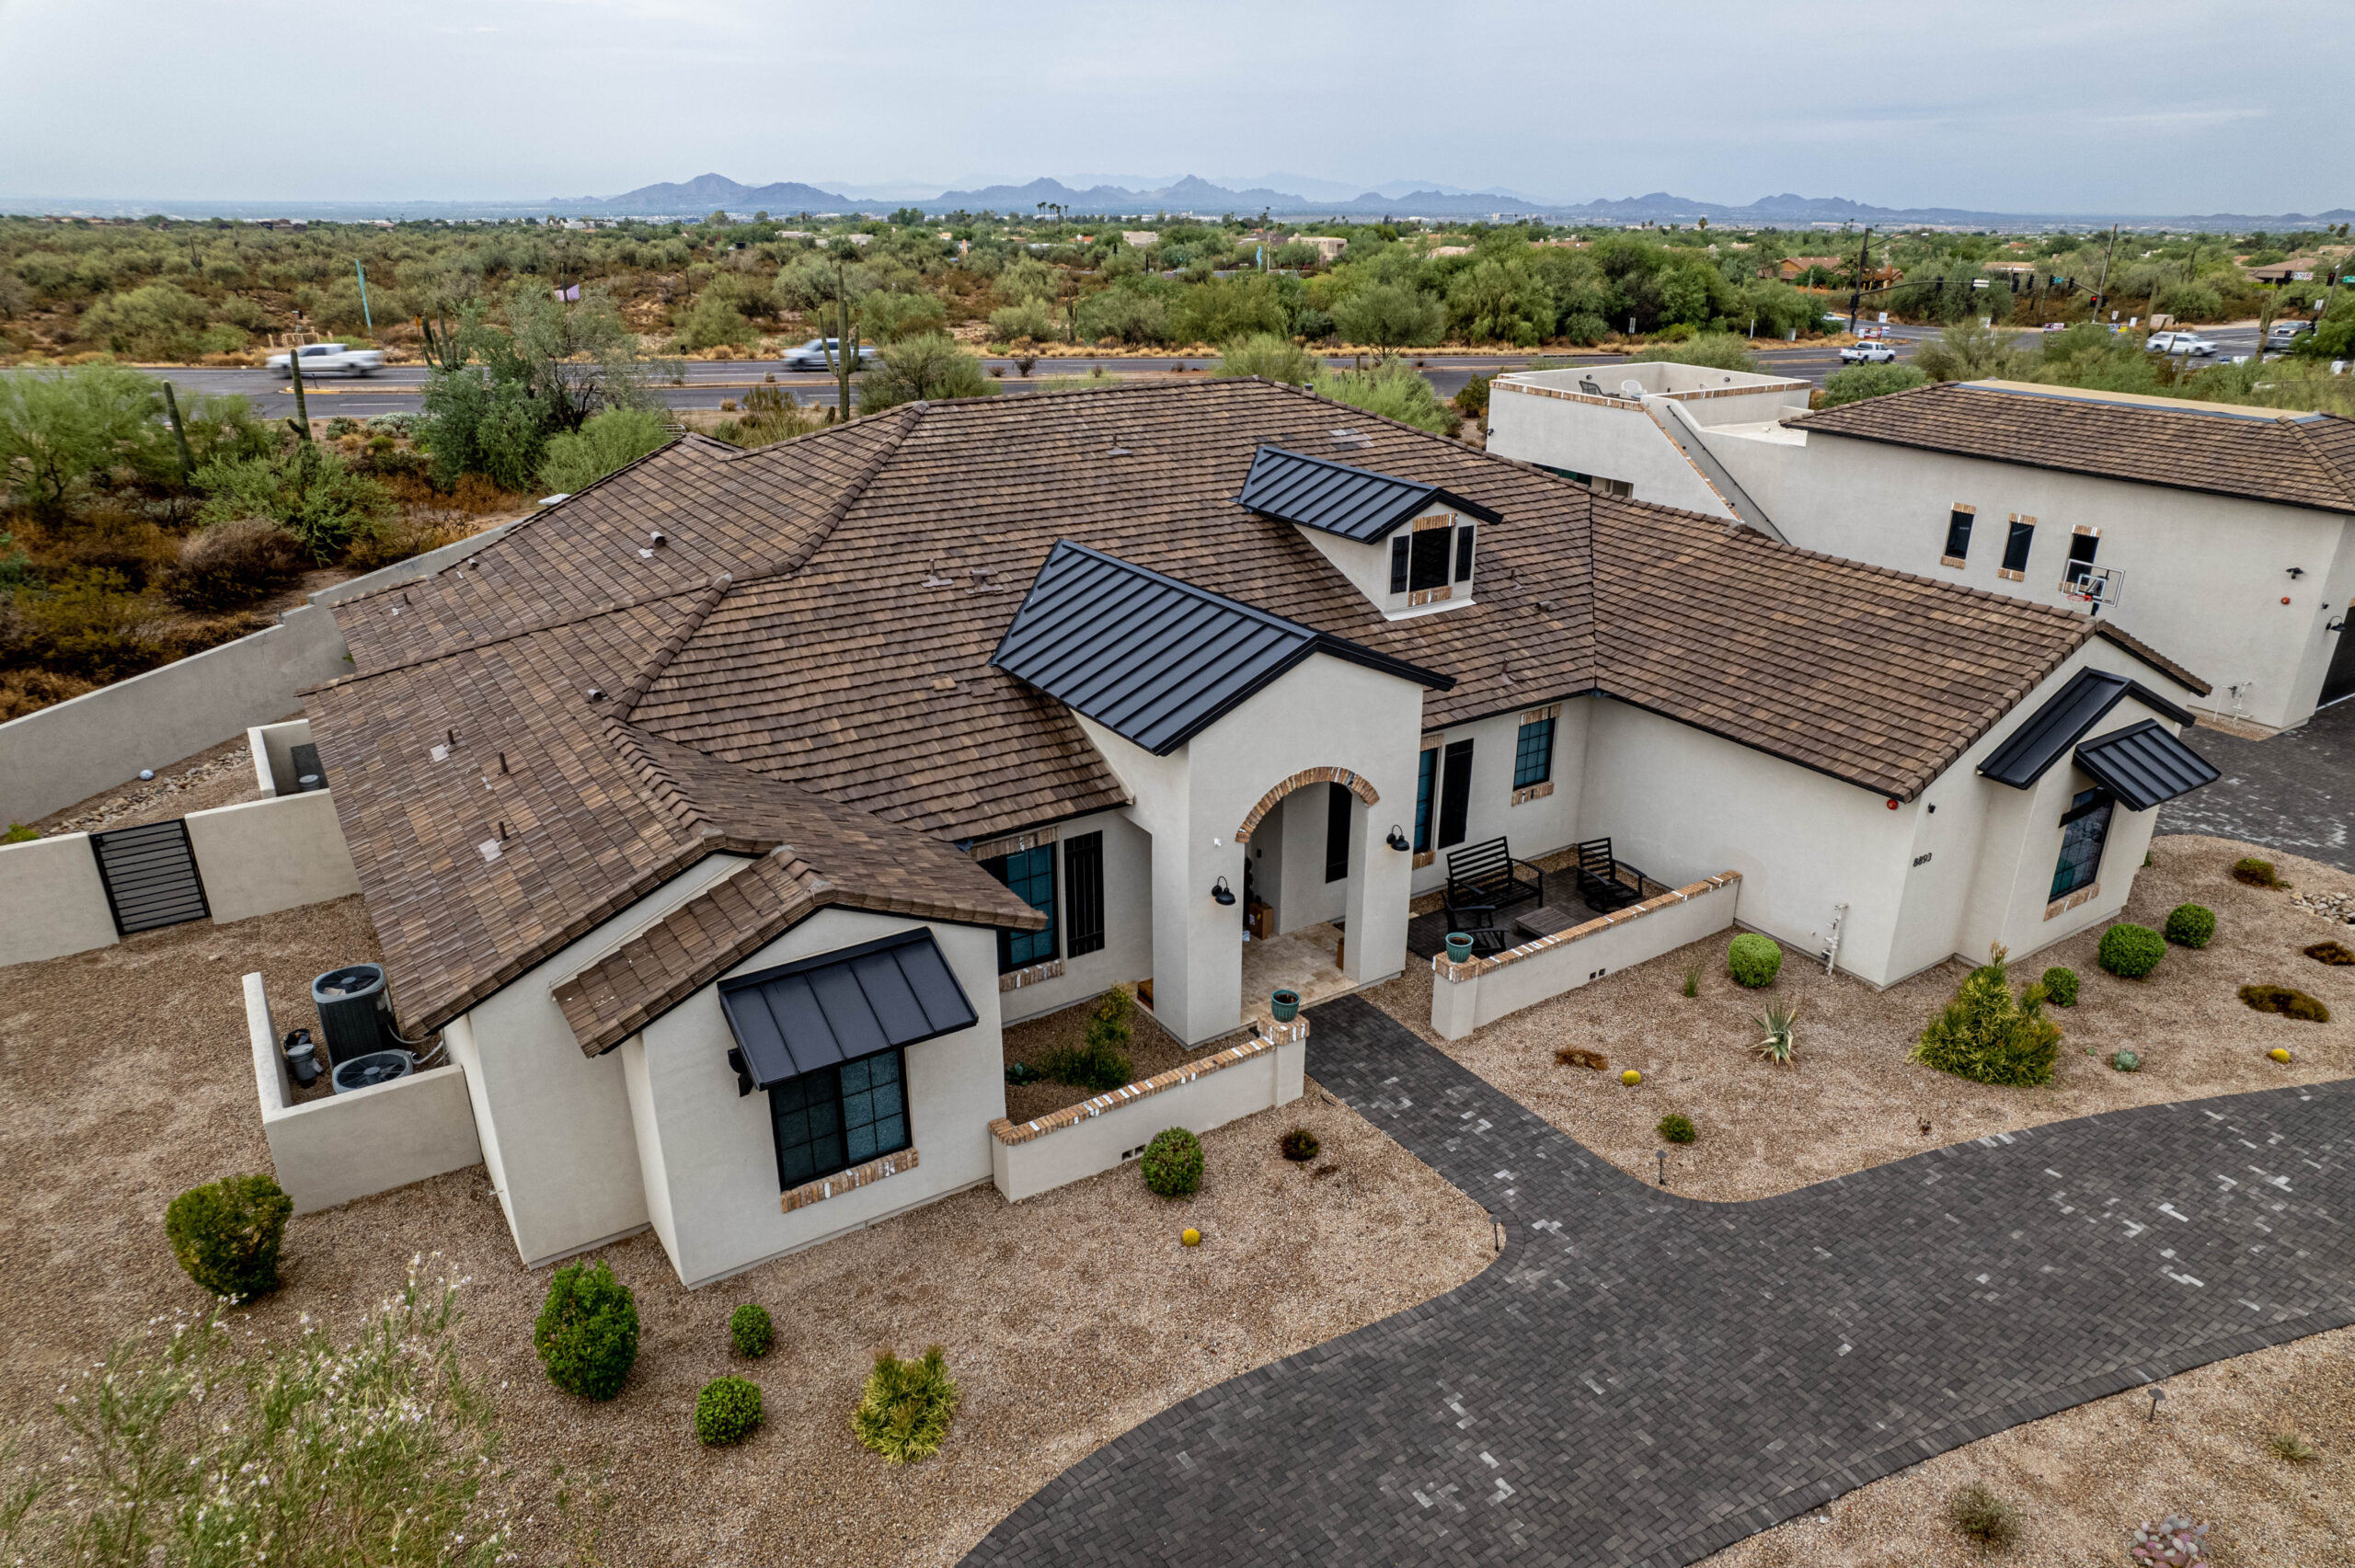 Top-down view of a freshly completed tile roof installation in Estancia.